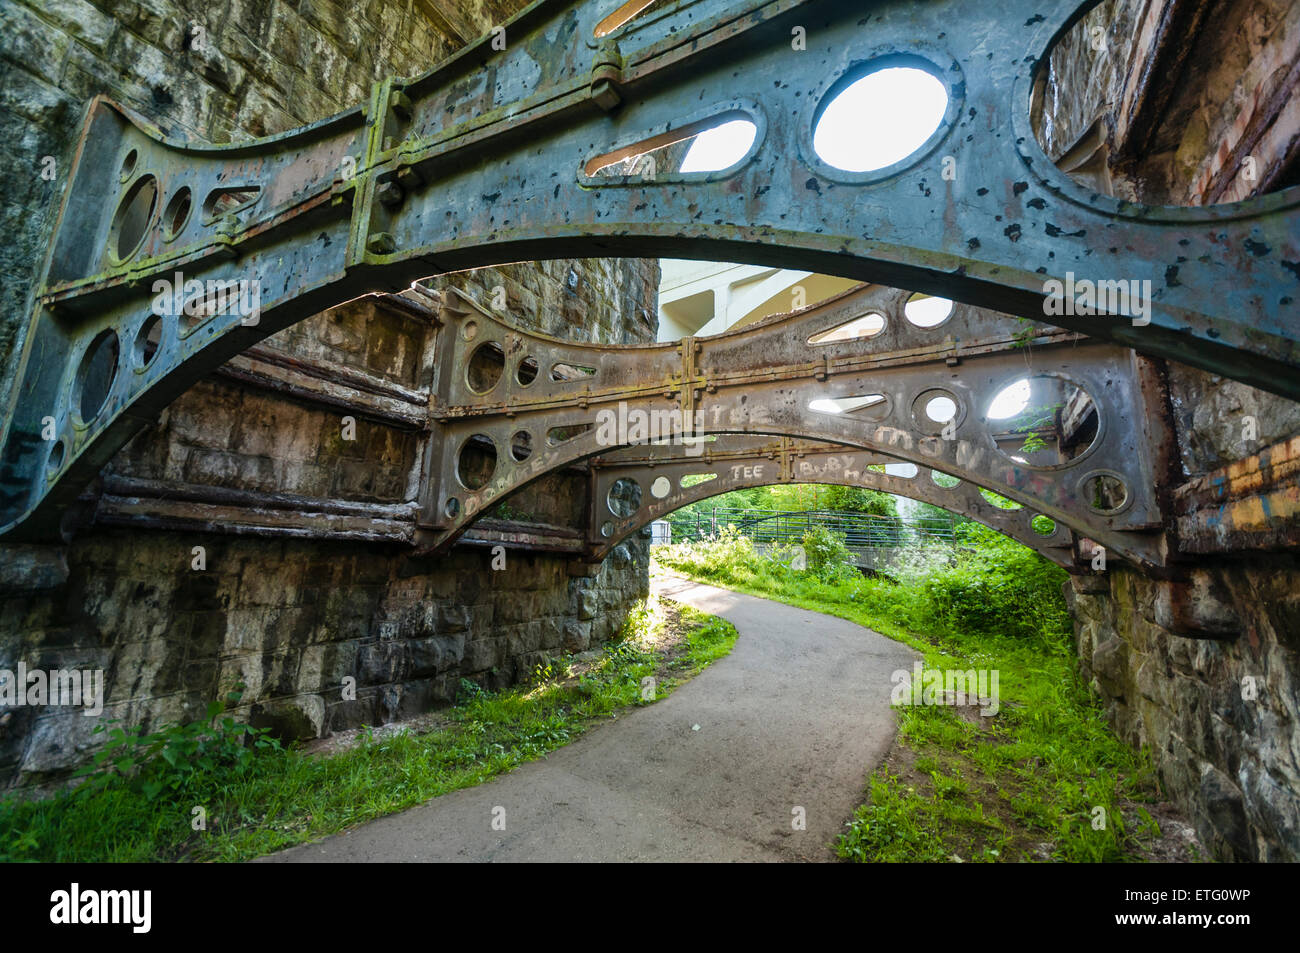 Iron braces on the supports of a Victorian viaduct. Stock Photo